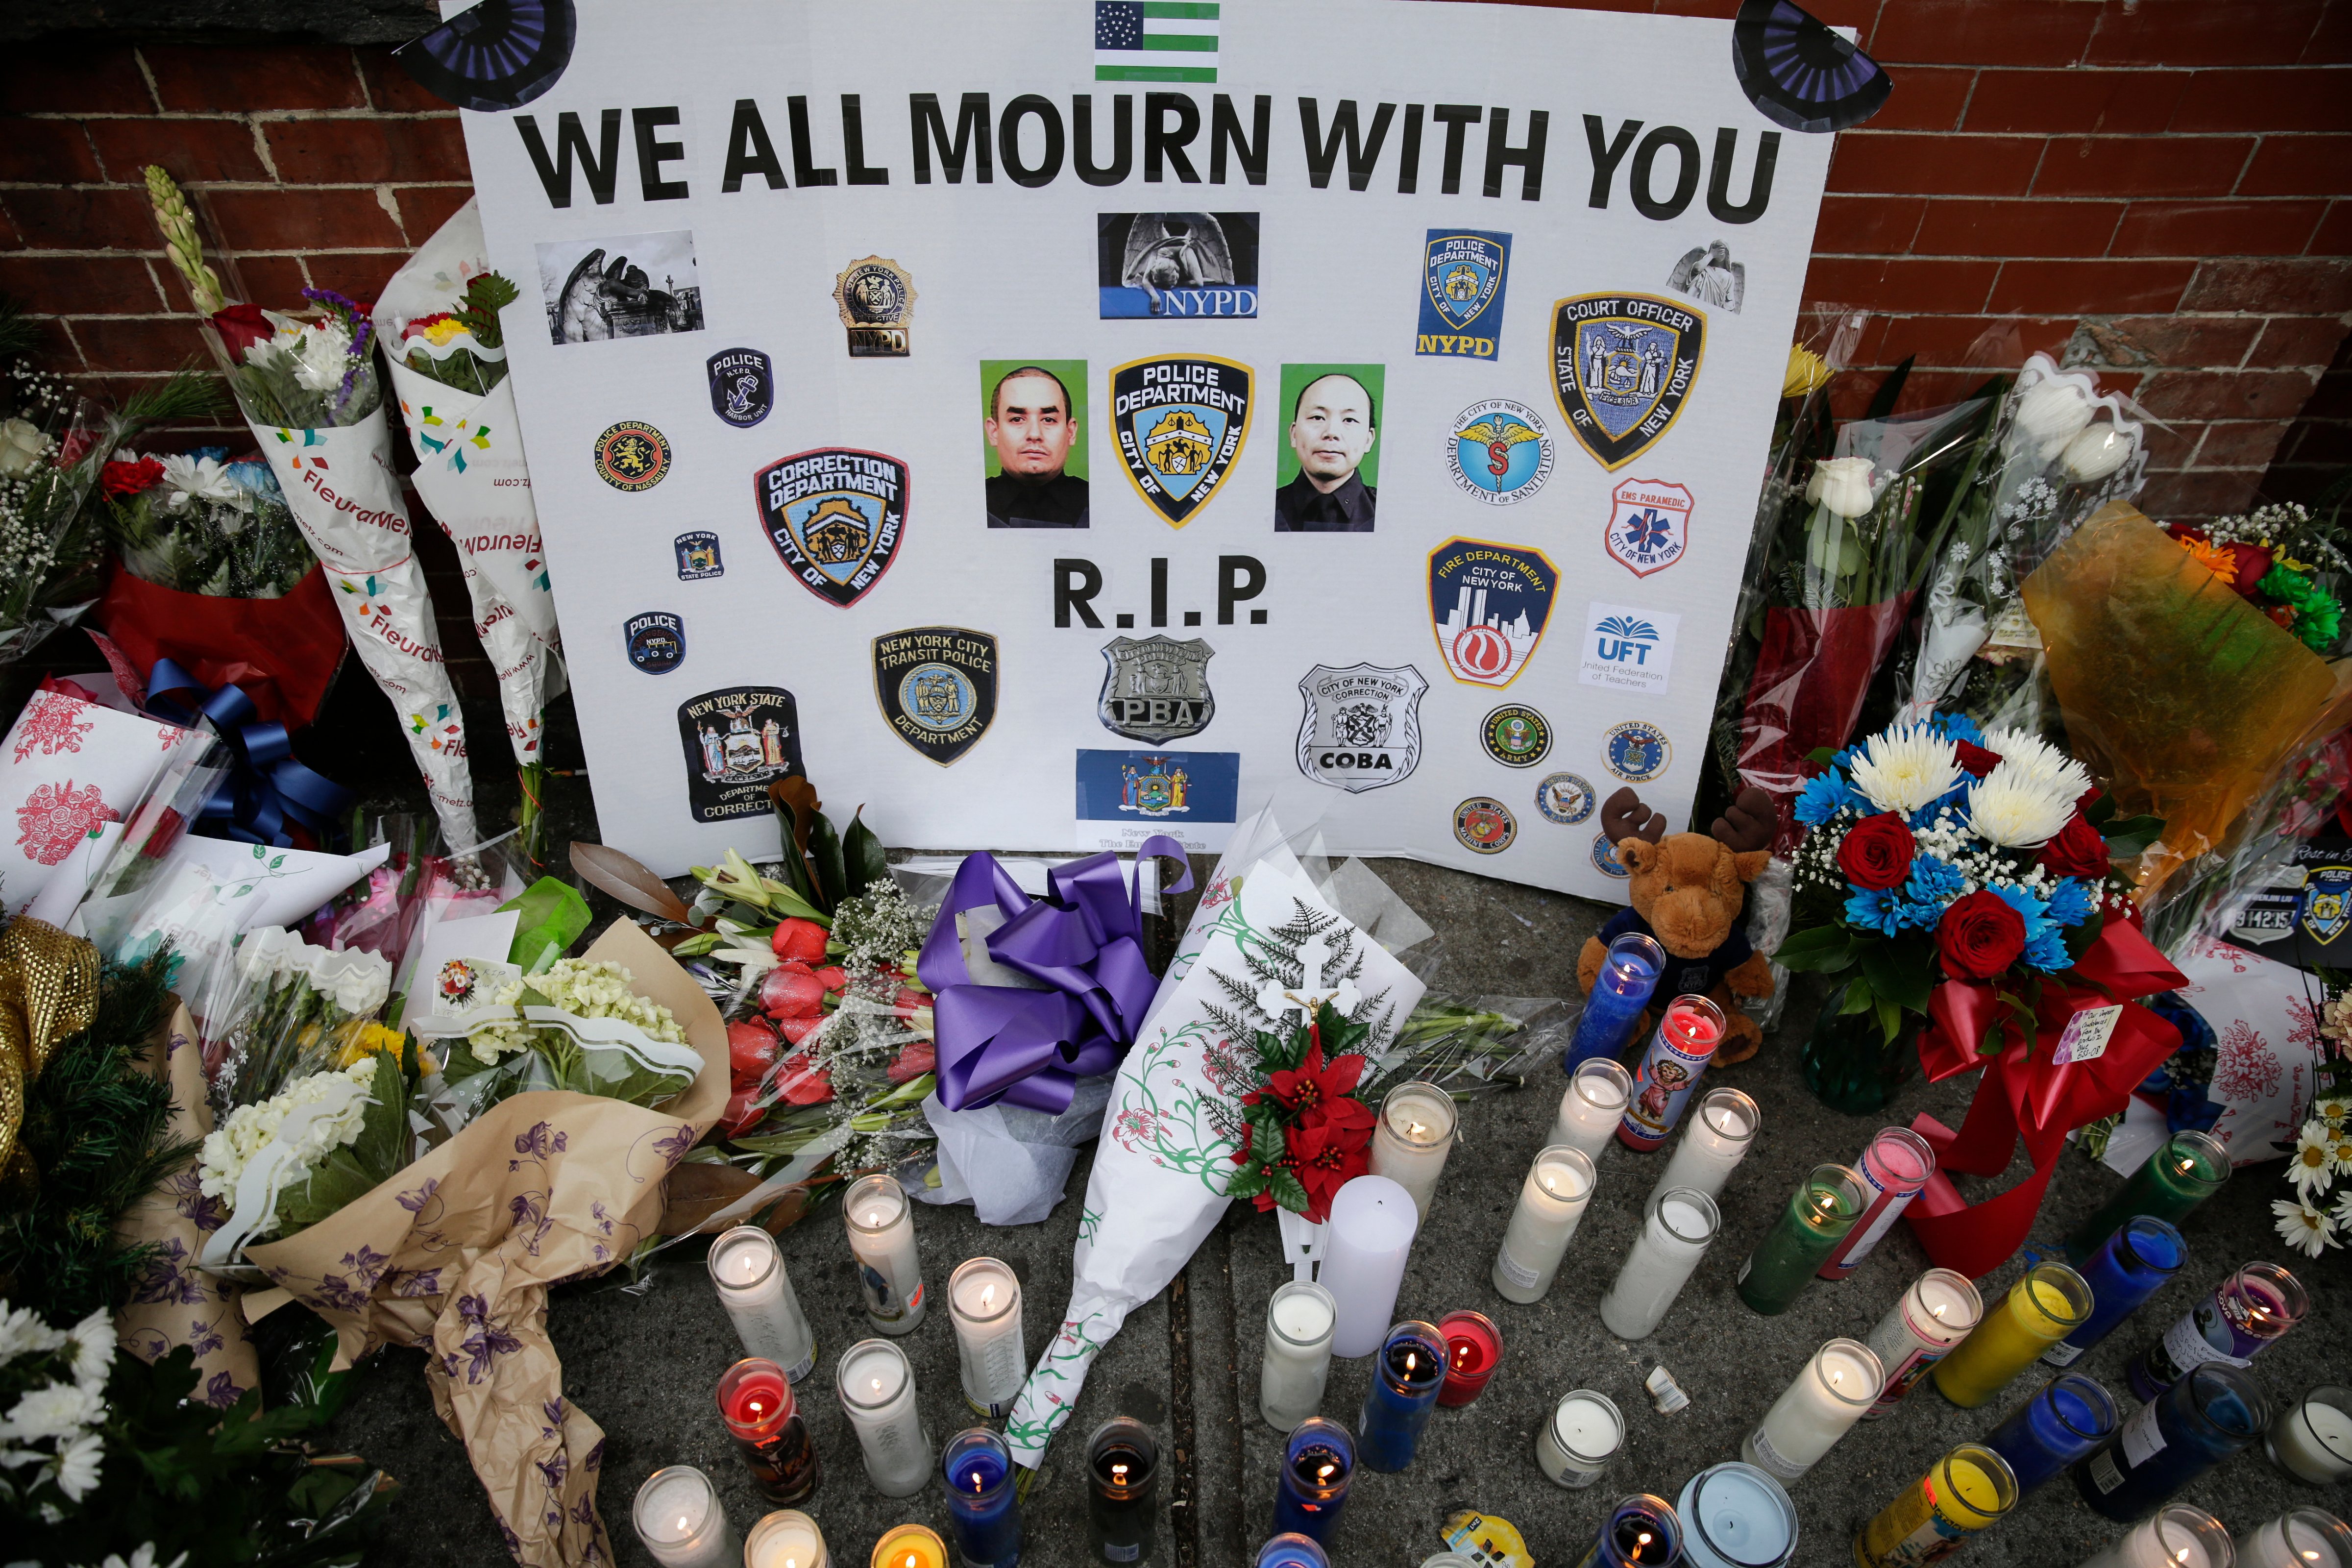 A view of the memorial for slain NYPD officers, Wenjian Liu and Rafael Ramos, on Tompkins Ave. and Myrtle Ave. where two officers were murdered, in Brooklyn, N.Y. on Dec. 22, 2014. (Bilgin Sasmaz—Anadolu Agency/Getty Images)